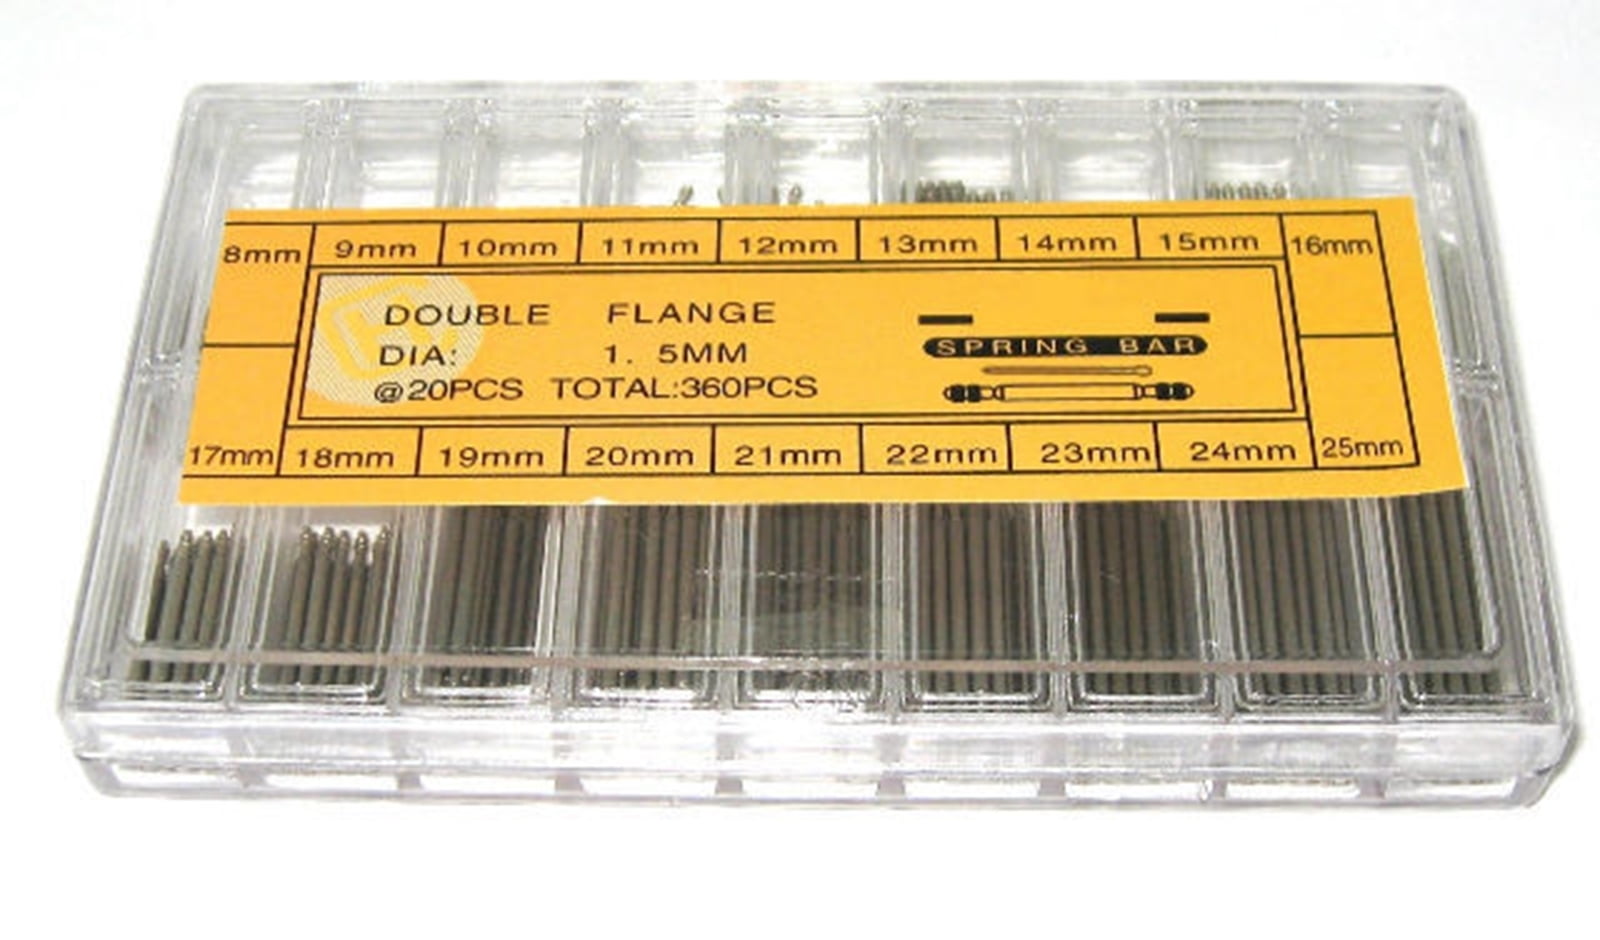 360 Spring Bar Assortment 1.5mm Double Flanged 